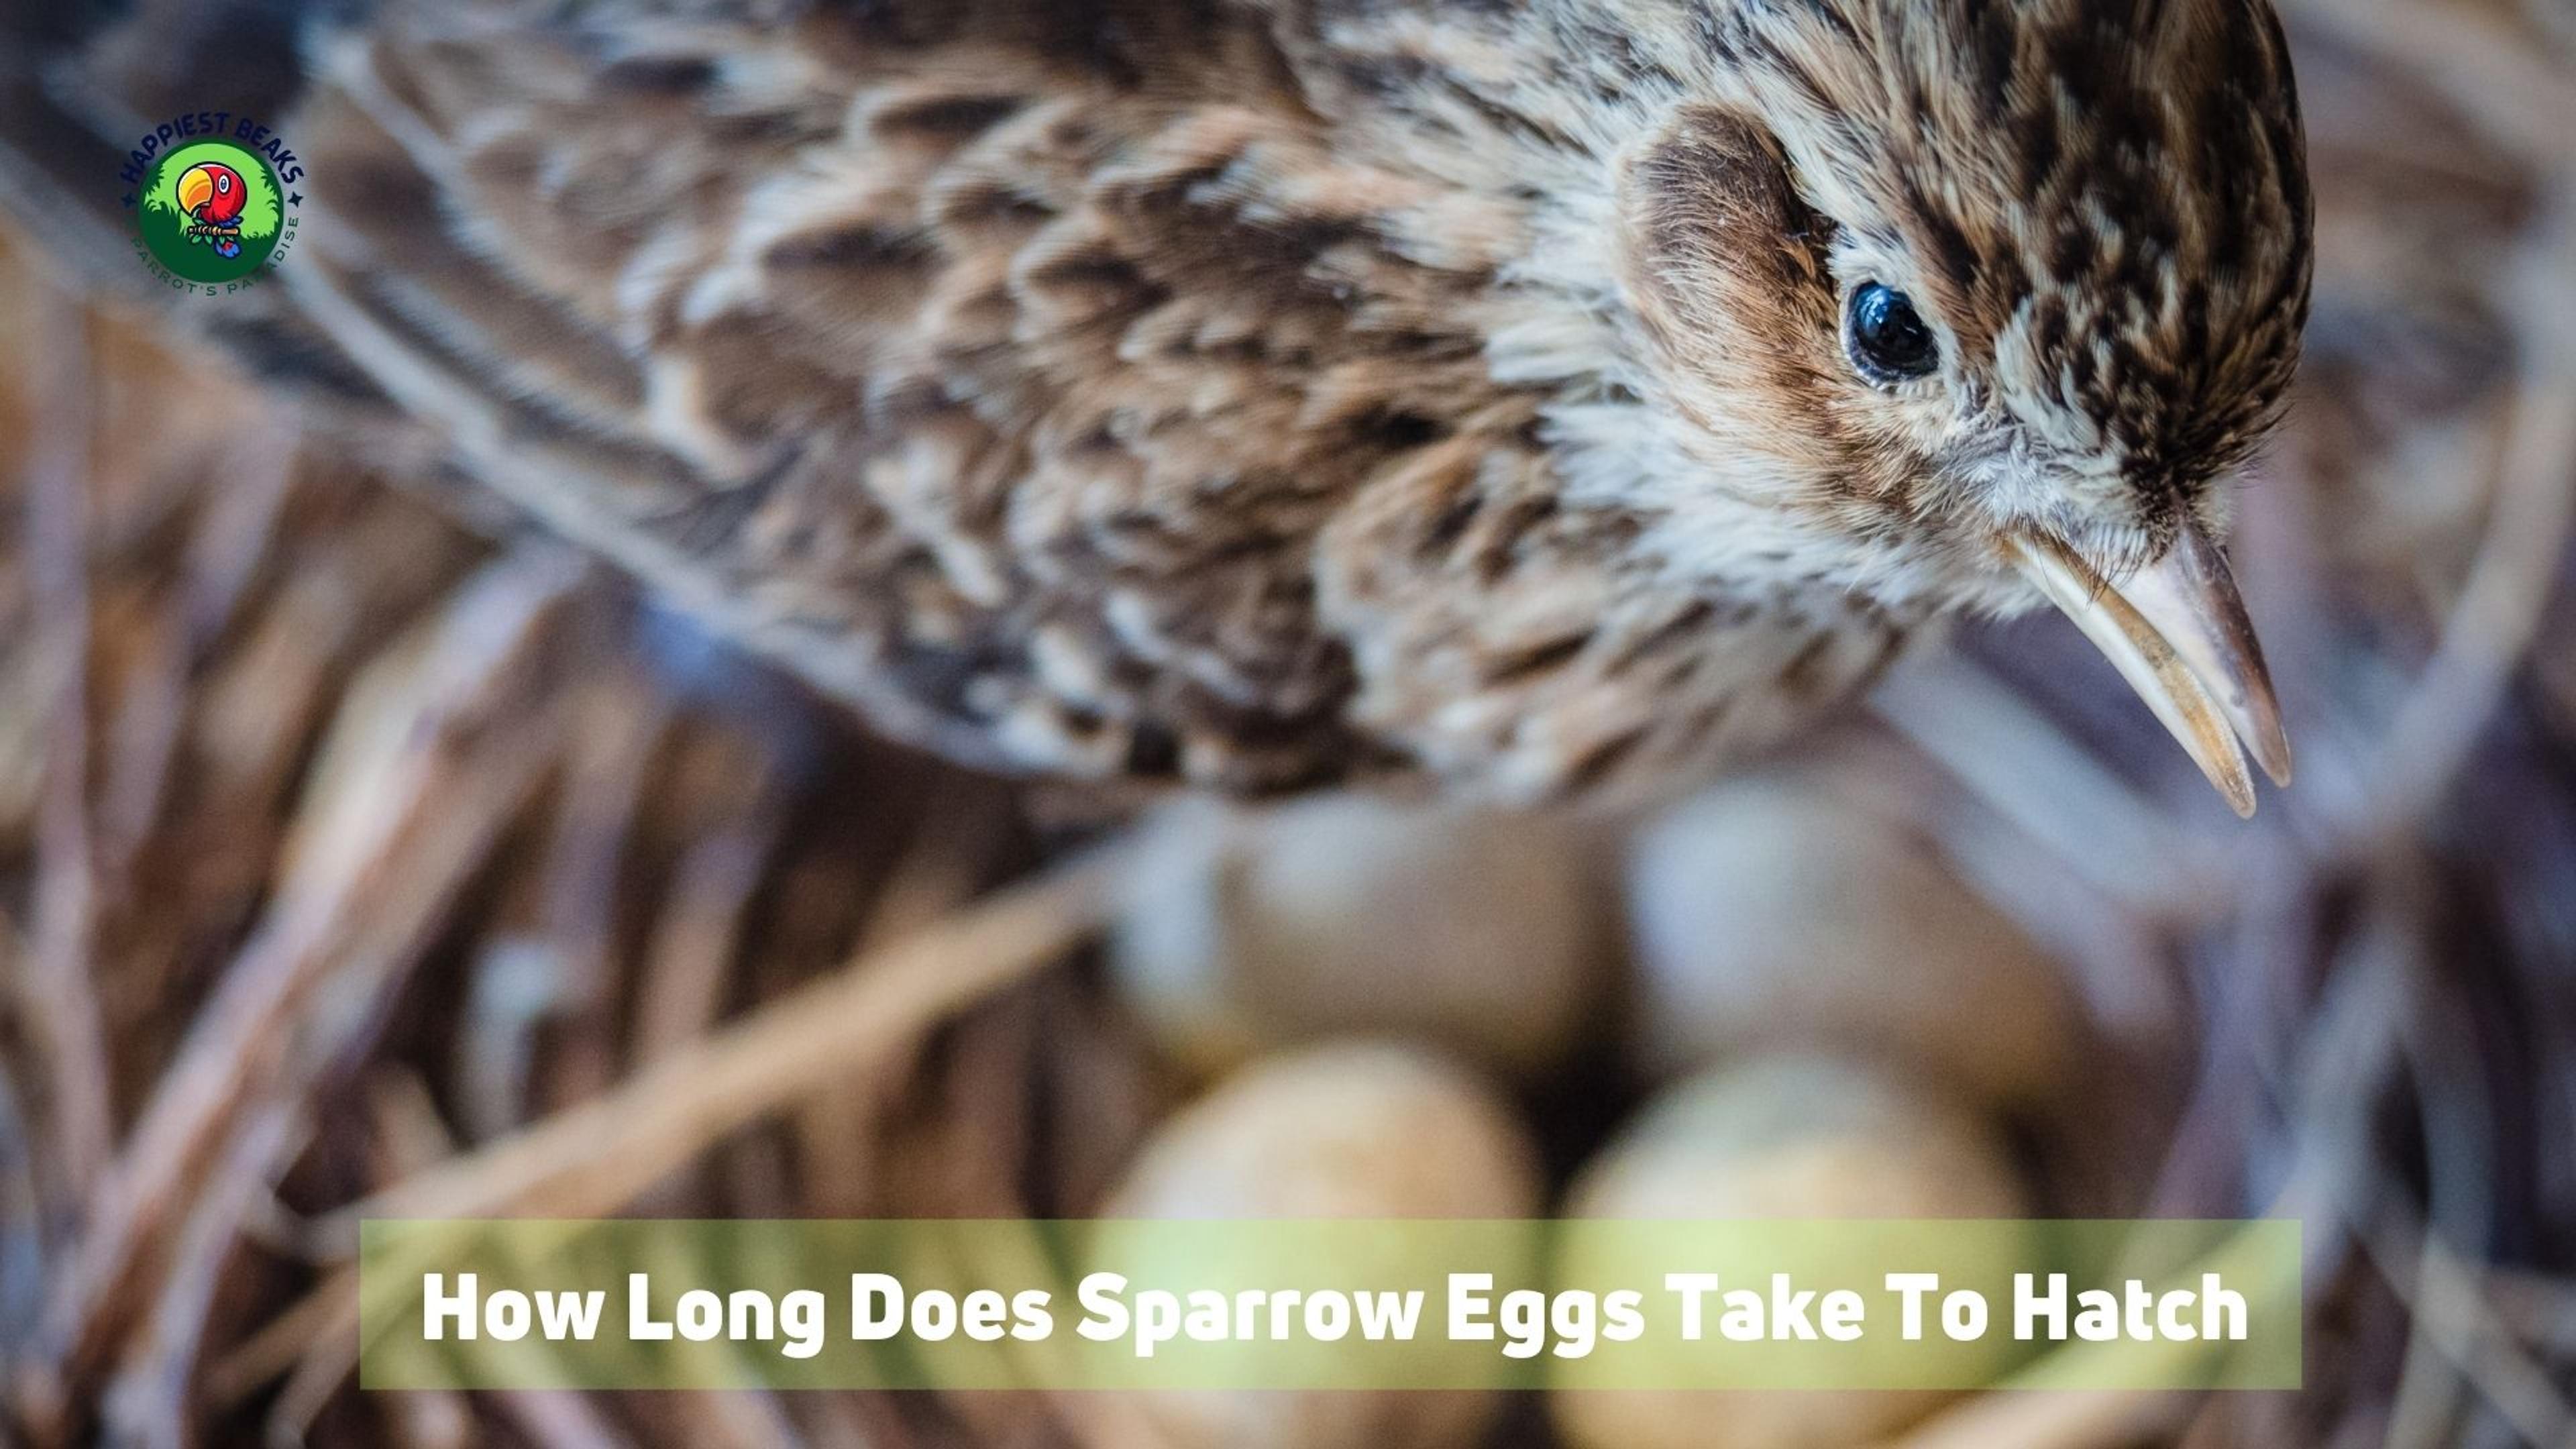 How Long Does Sparrow Eggs Take To Hatch